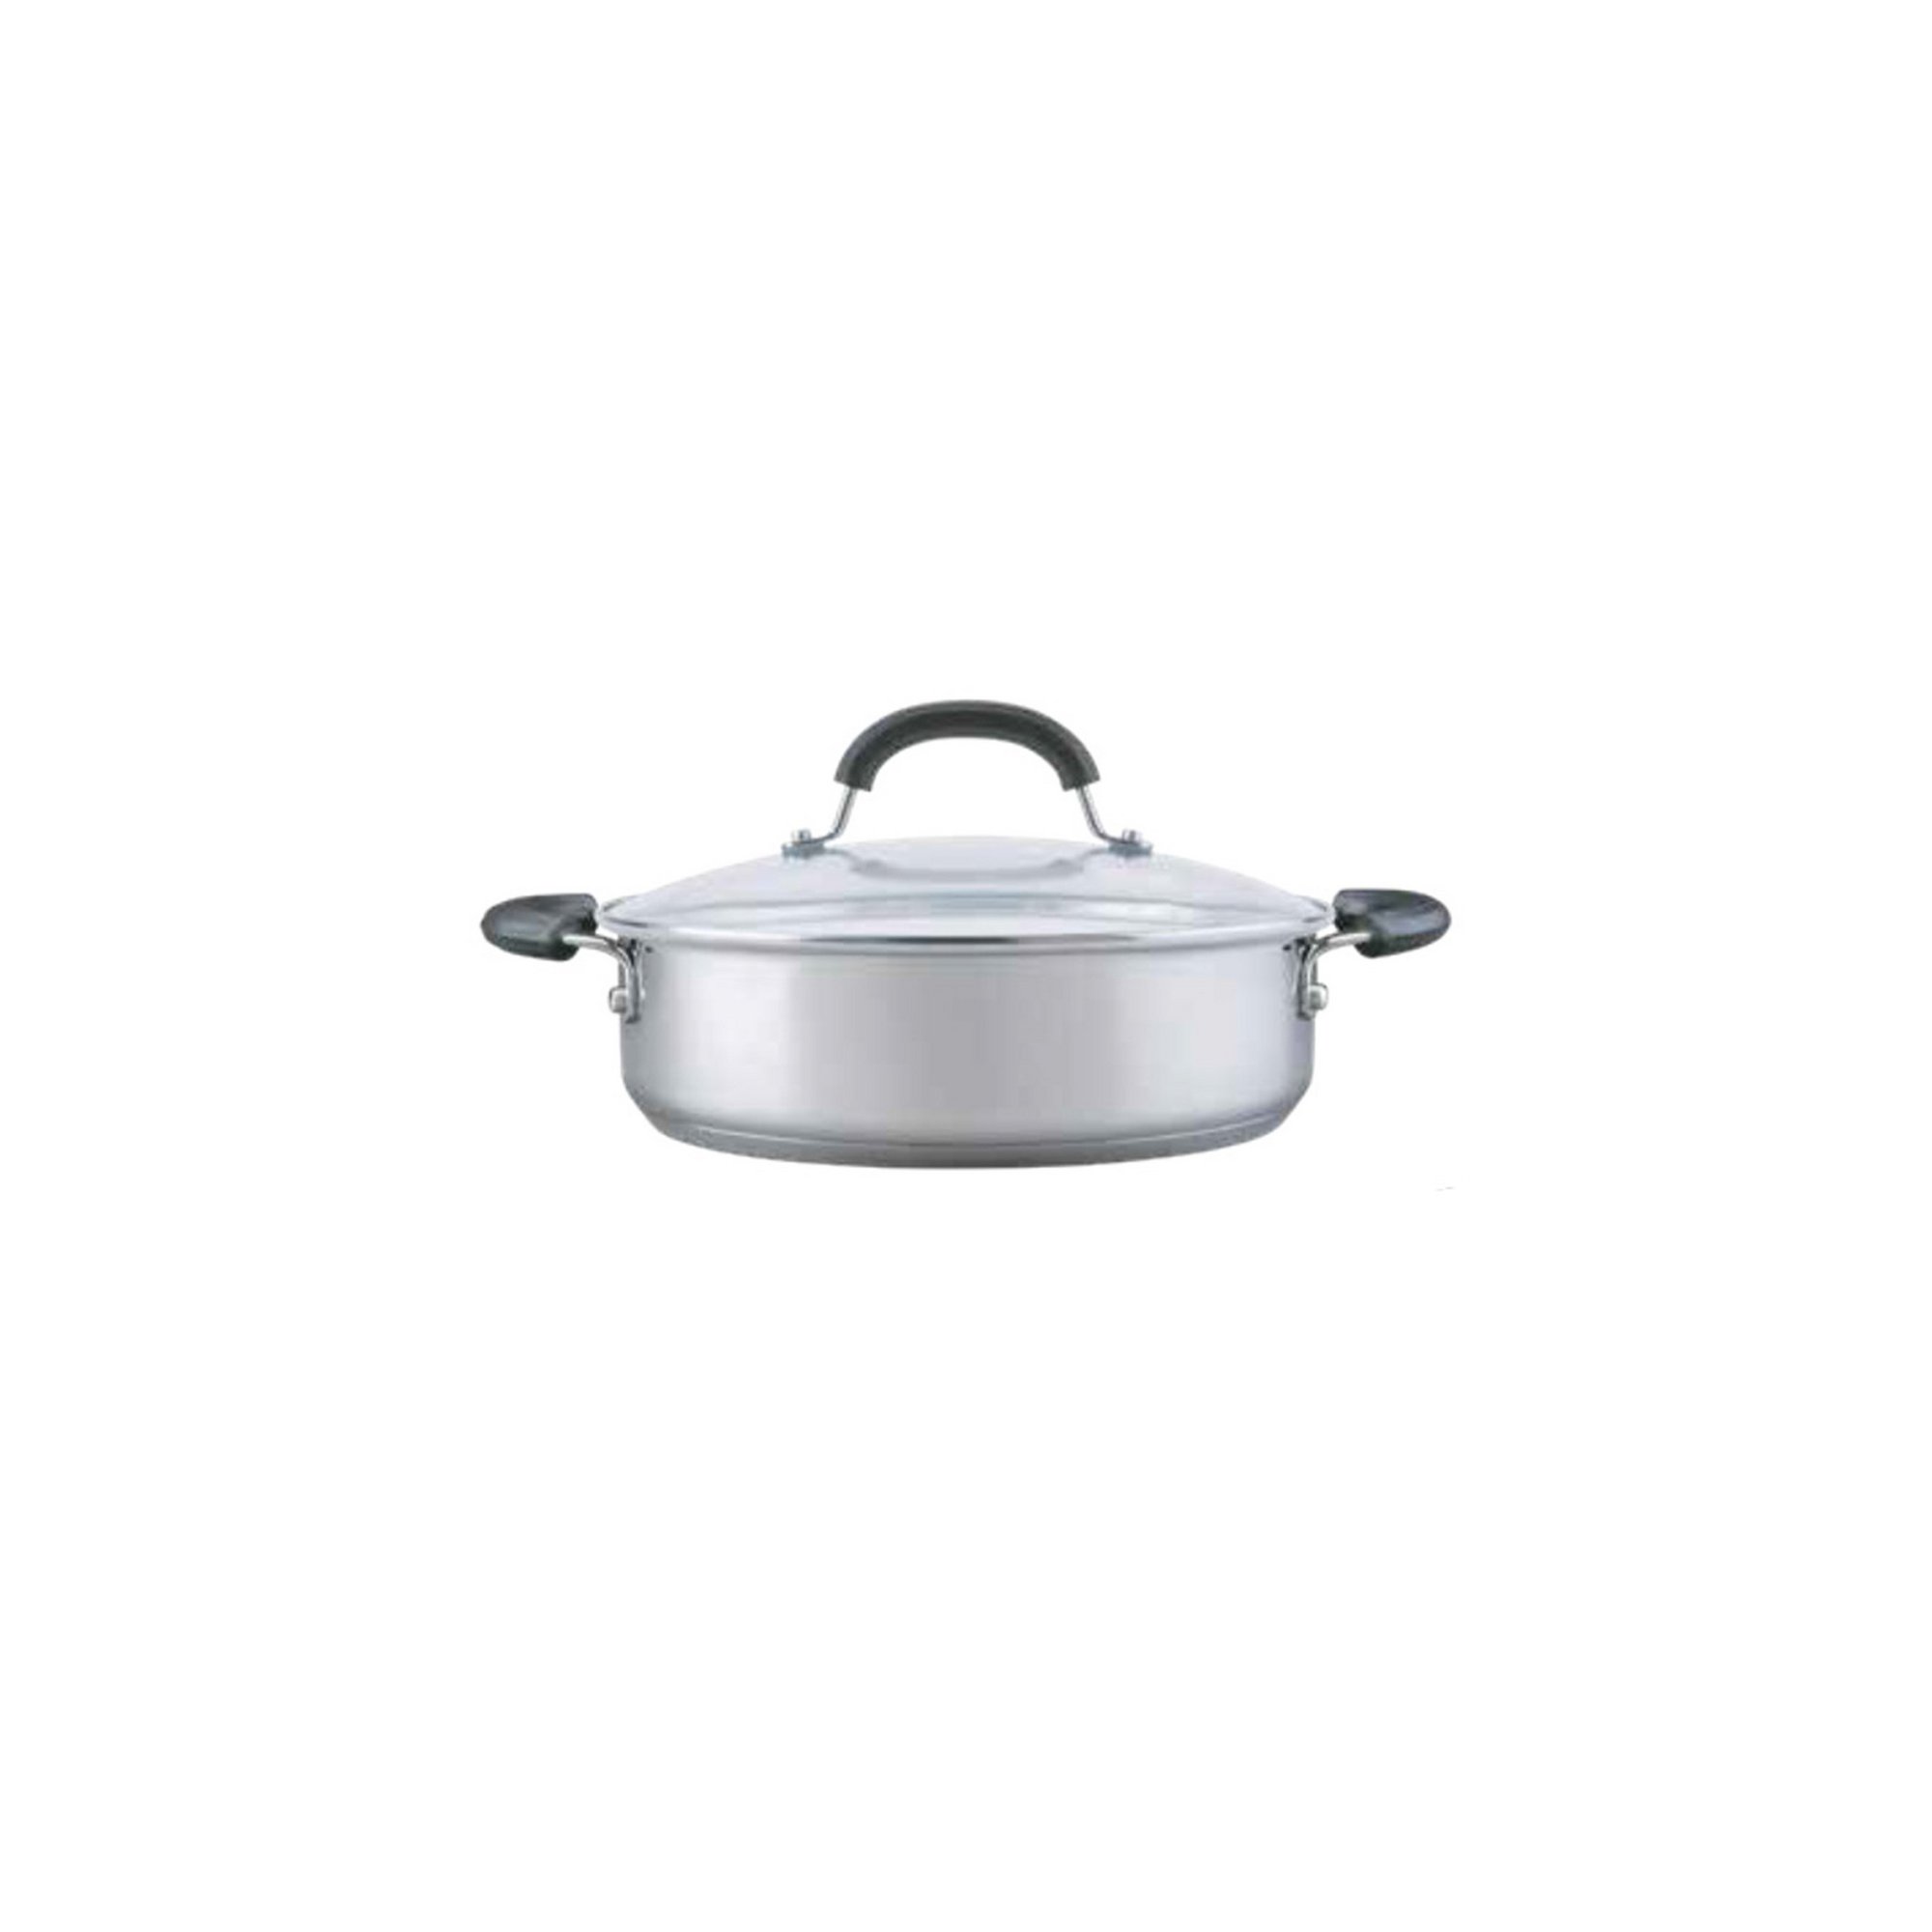 Circulon Total Stainless Steel 24cm Shallow Casserole Dish